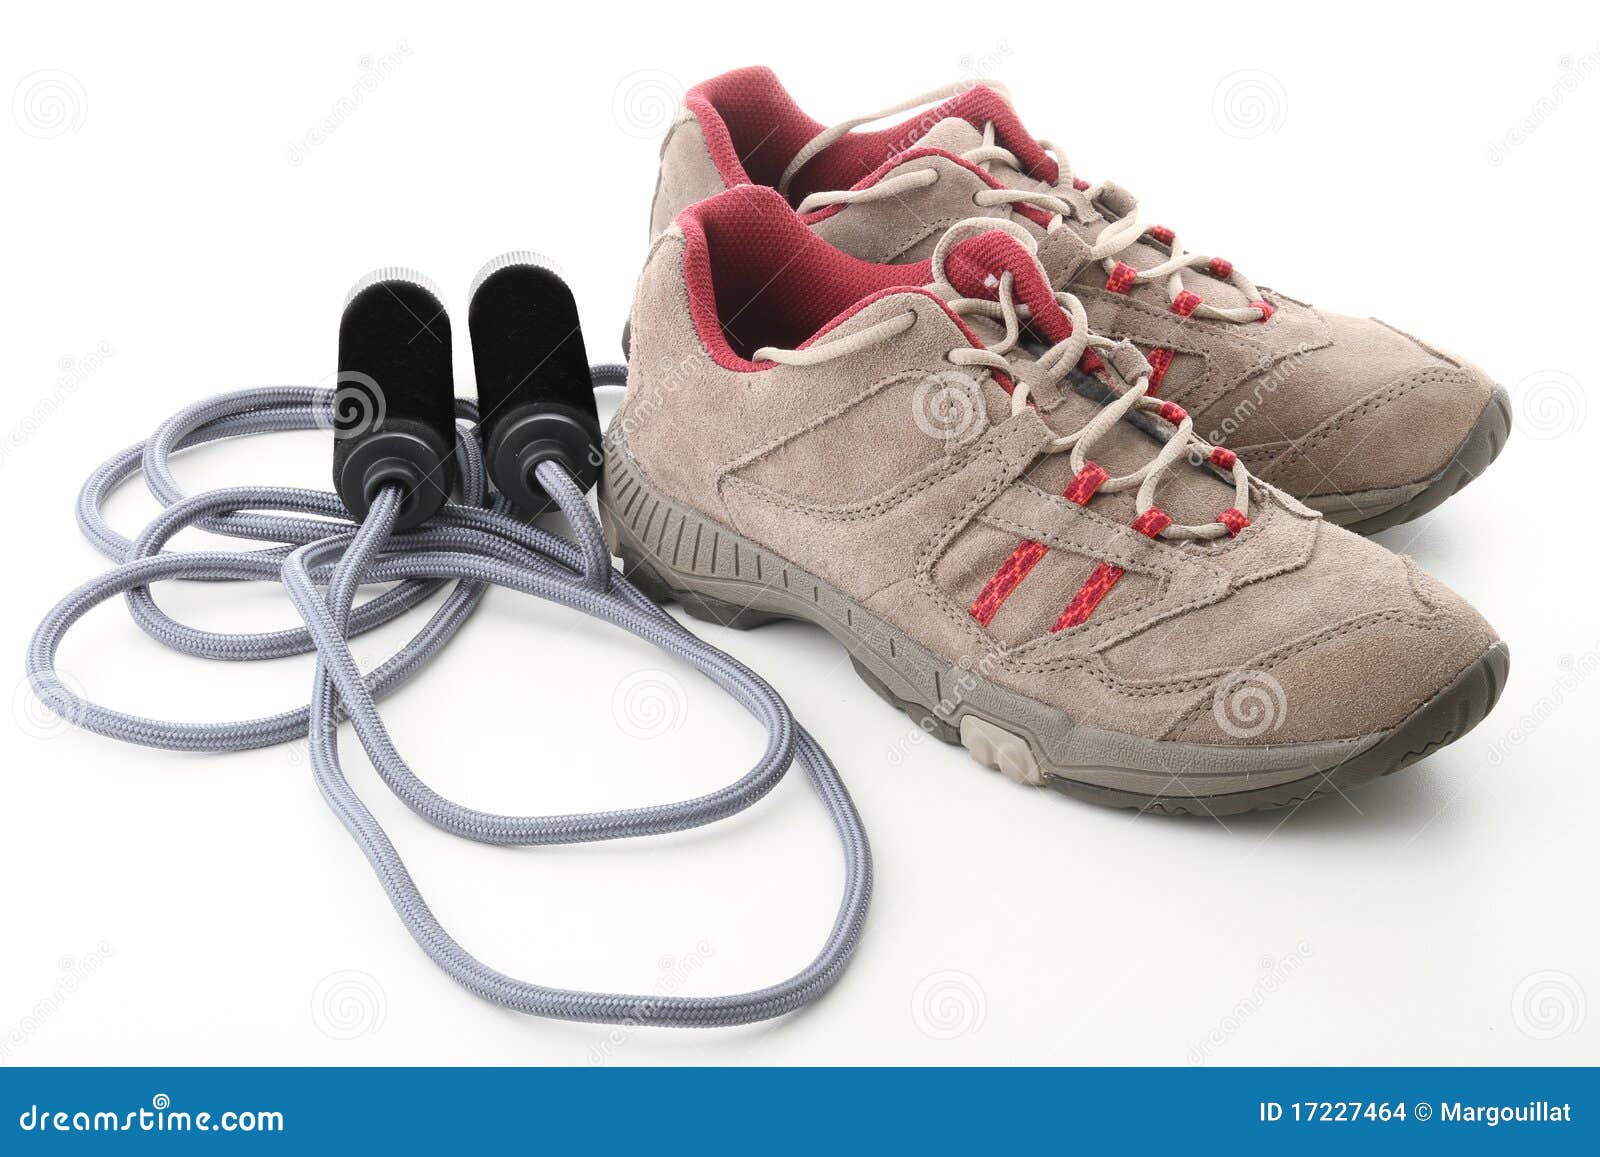 Rope  Images Jump Shoes for jumping And Stock  rope  17227464 shoes Image: